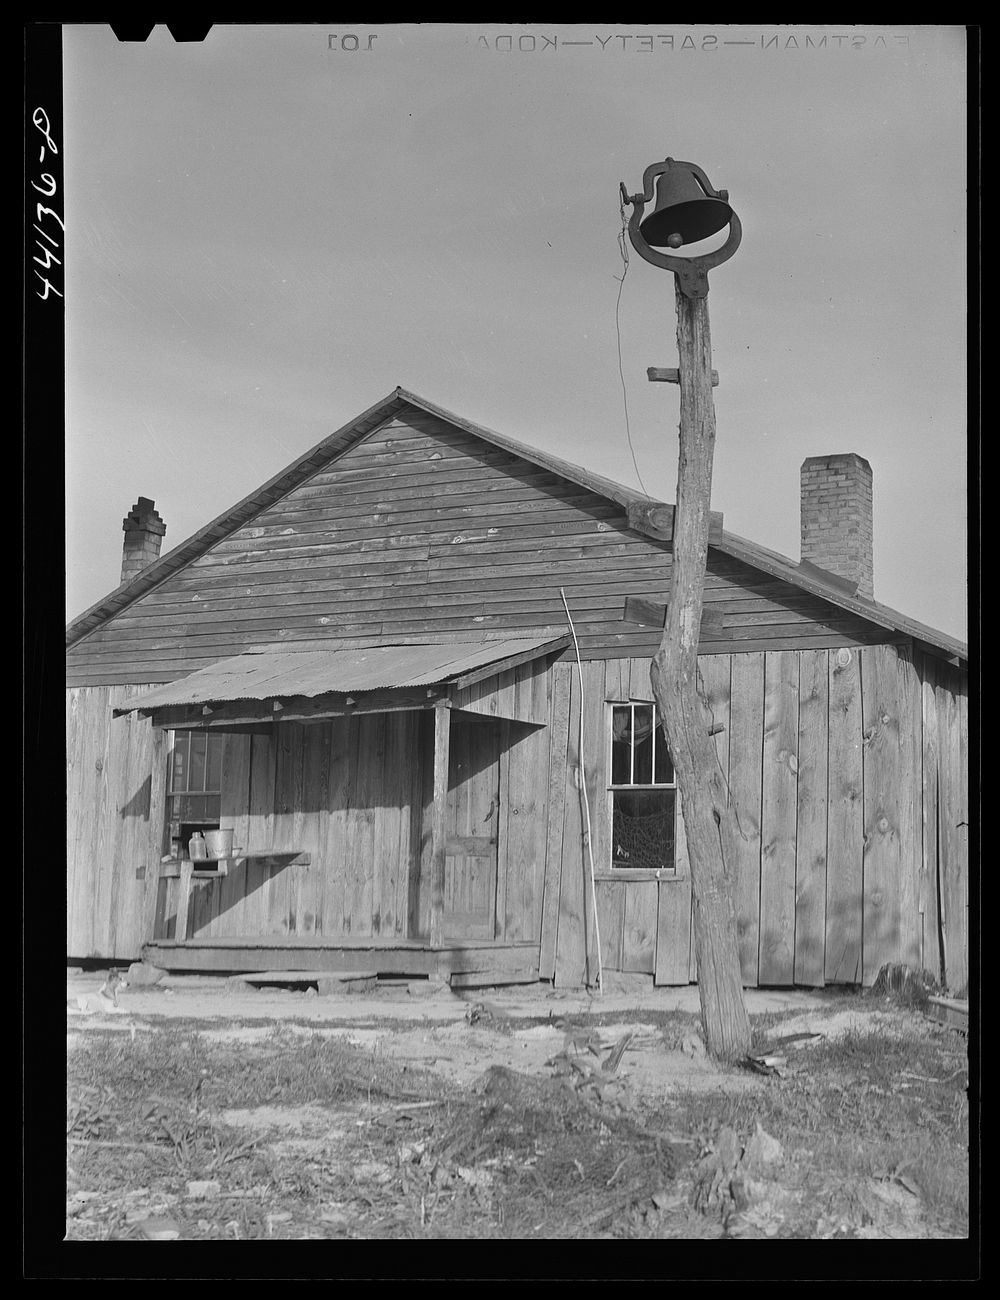 Tenant house and plantation bell. Heard County, Georgia. Sourced from the Library of Congress.